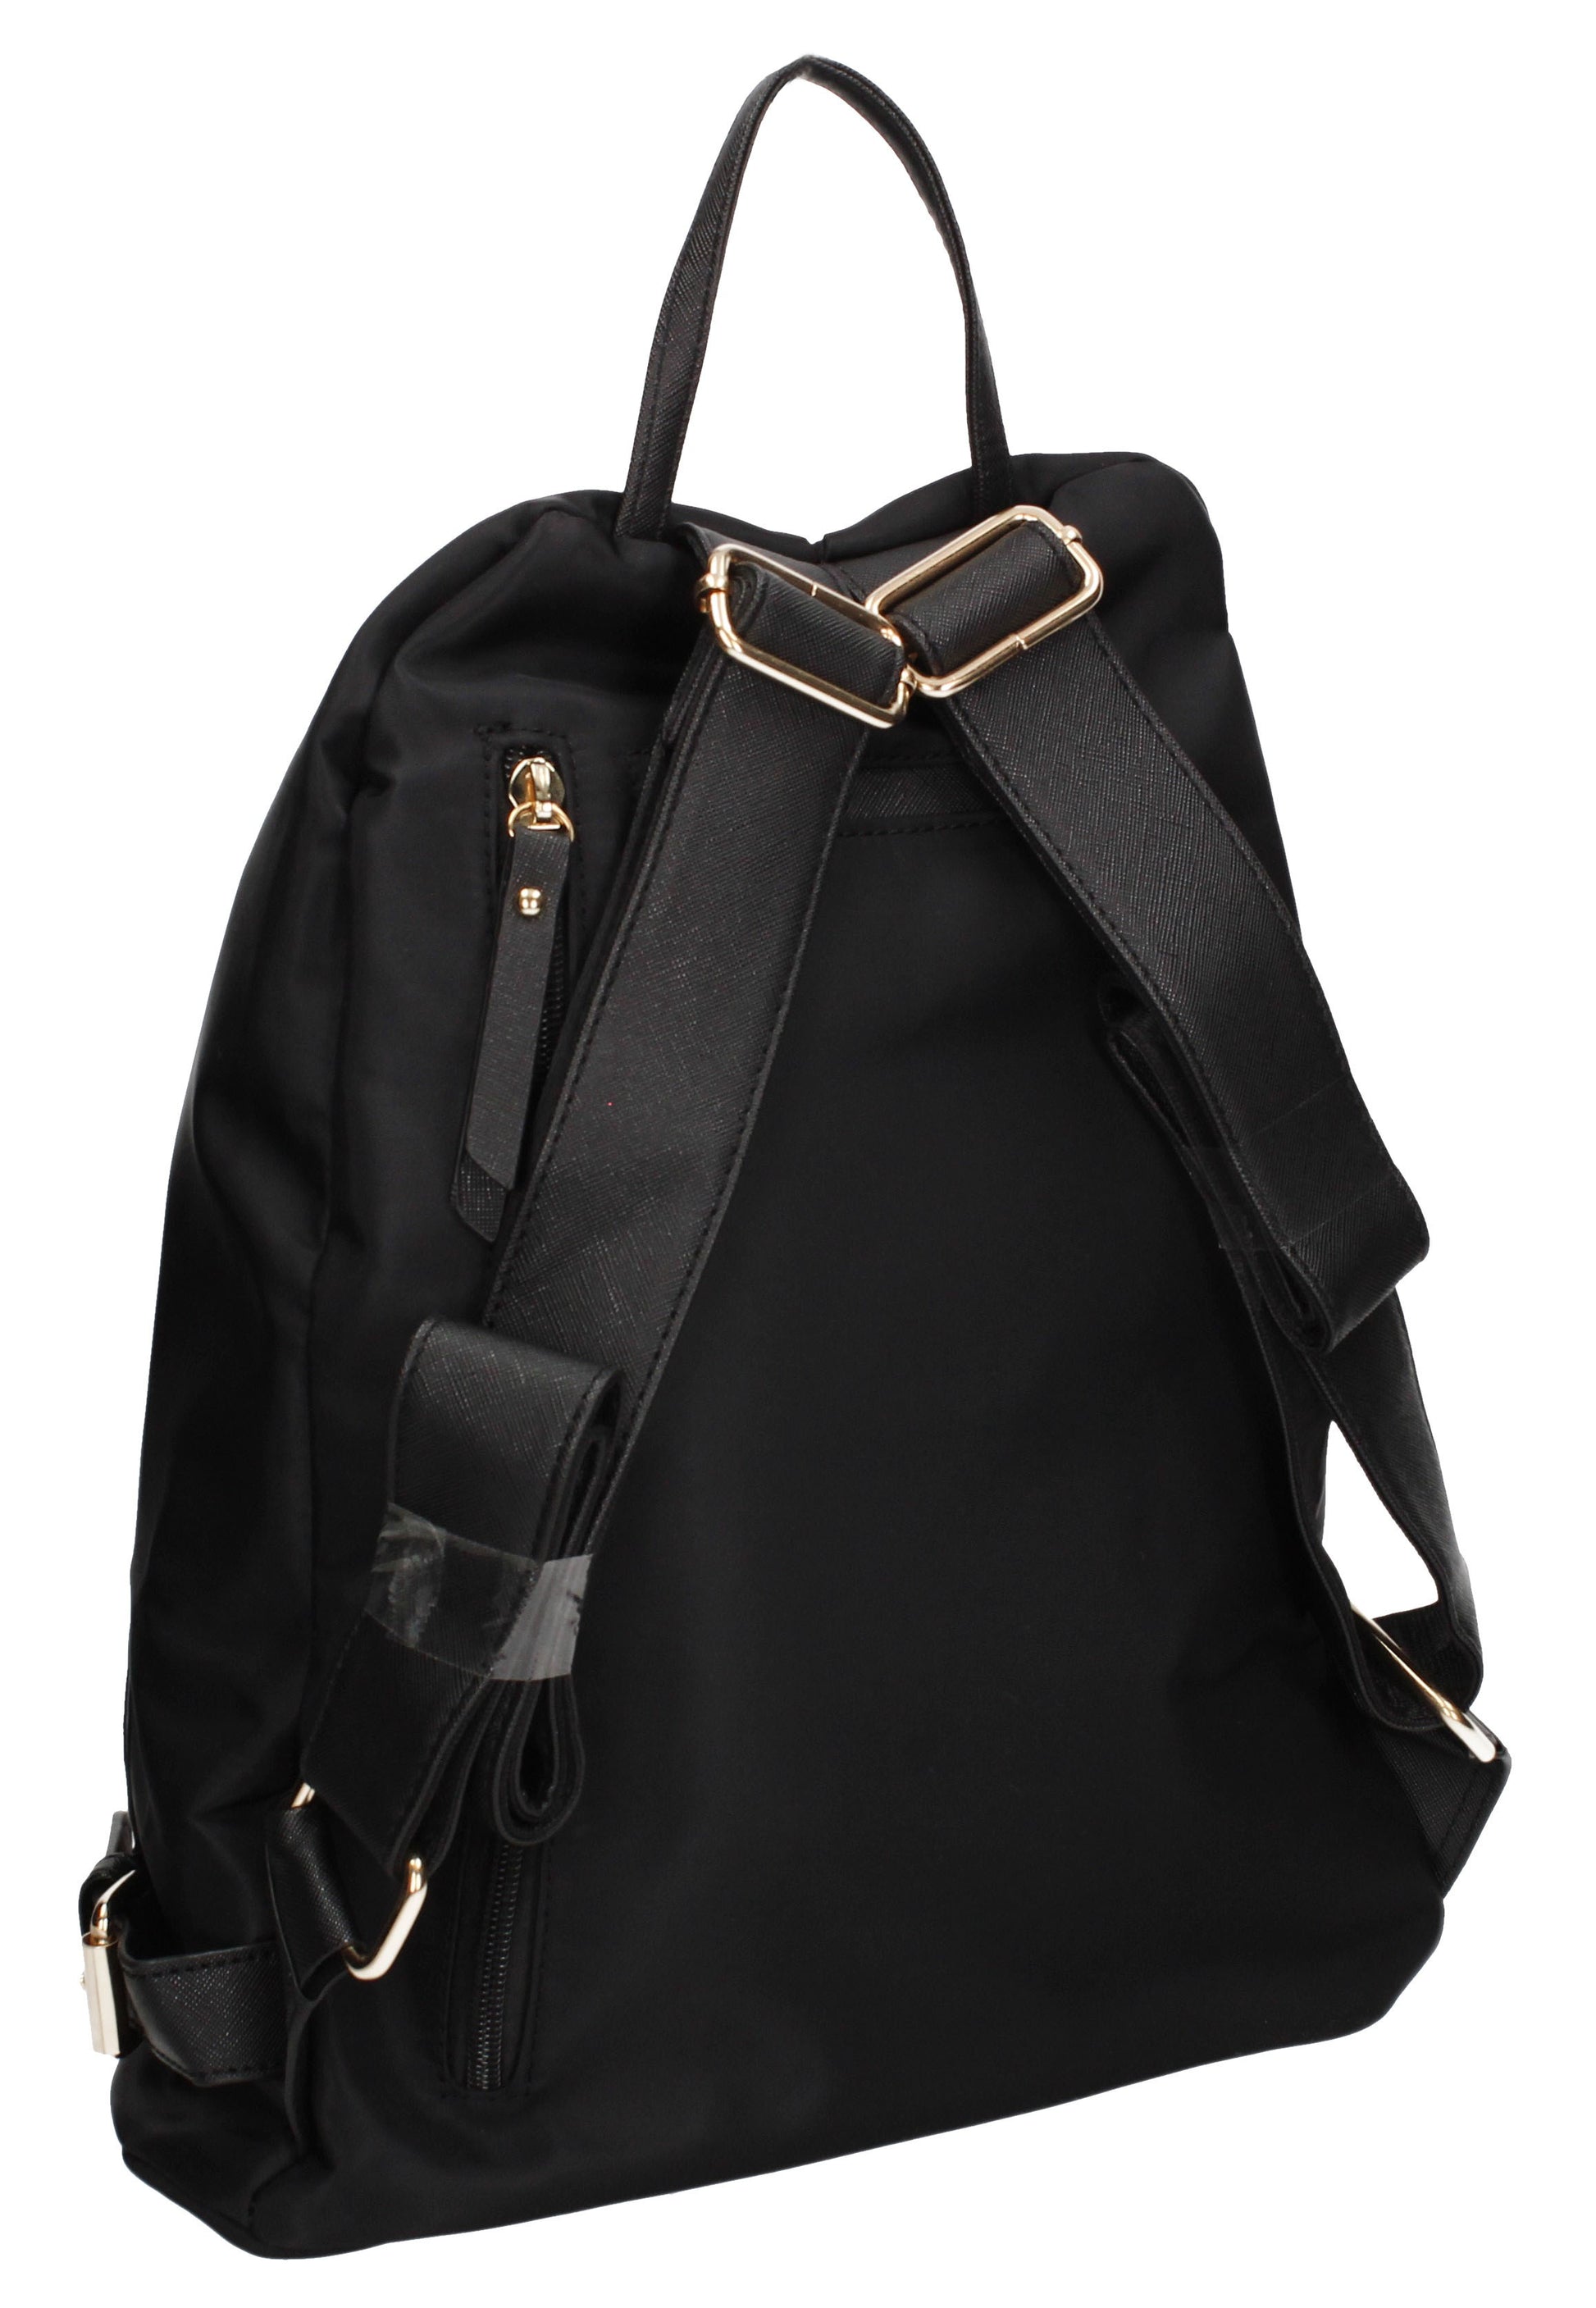 Swanky Swans Jesse Backpack Black Perfect Backpack for school!